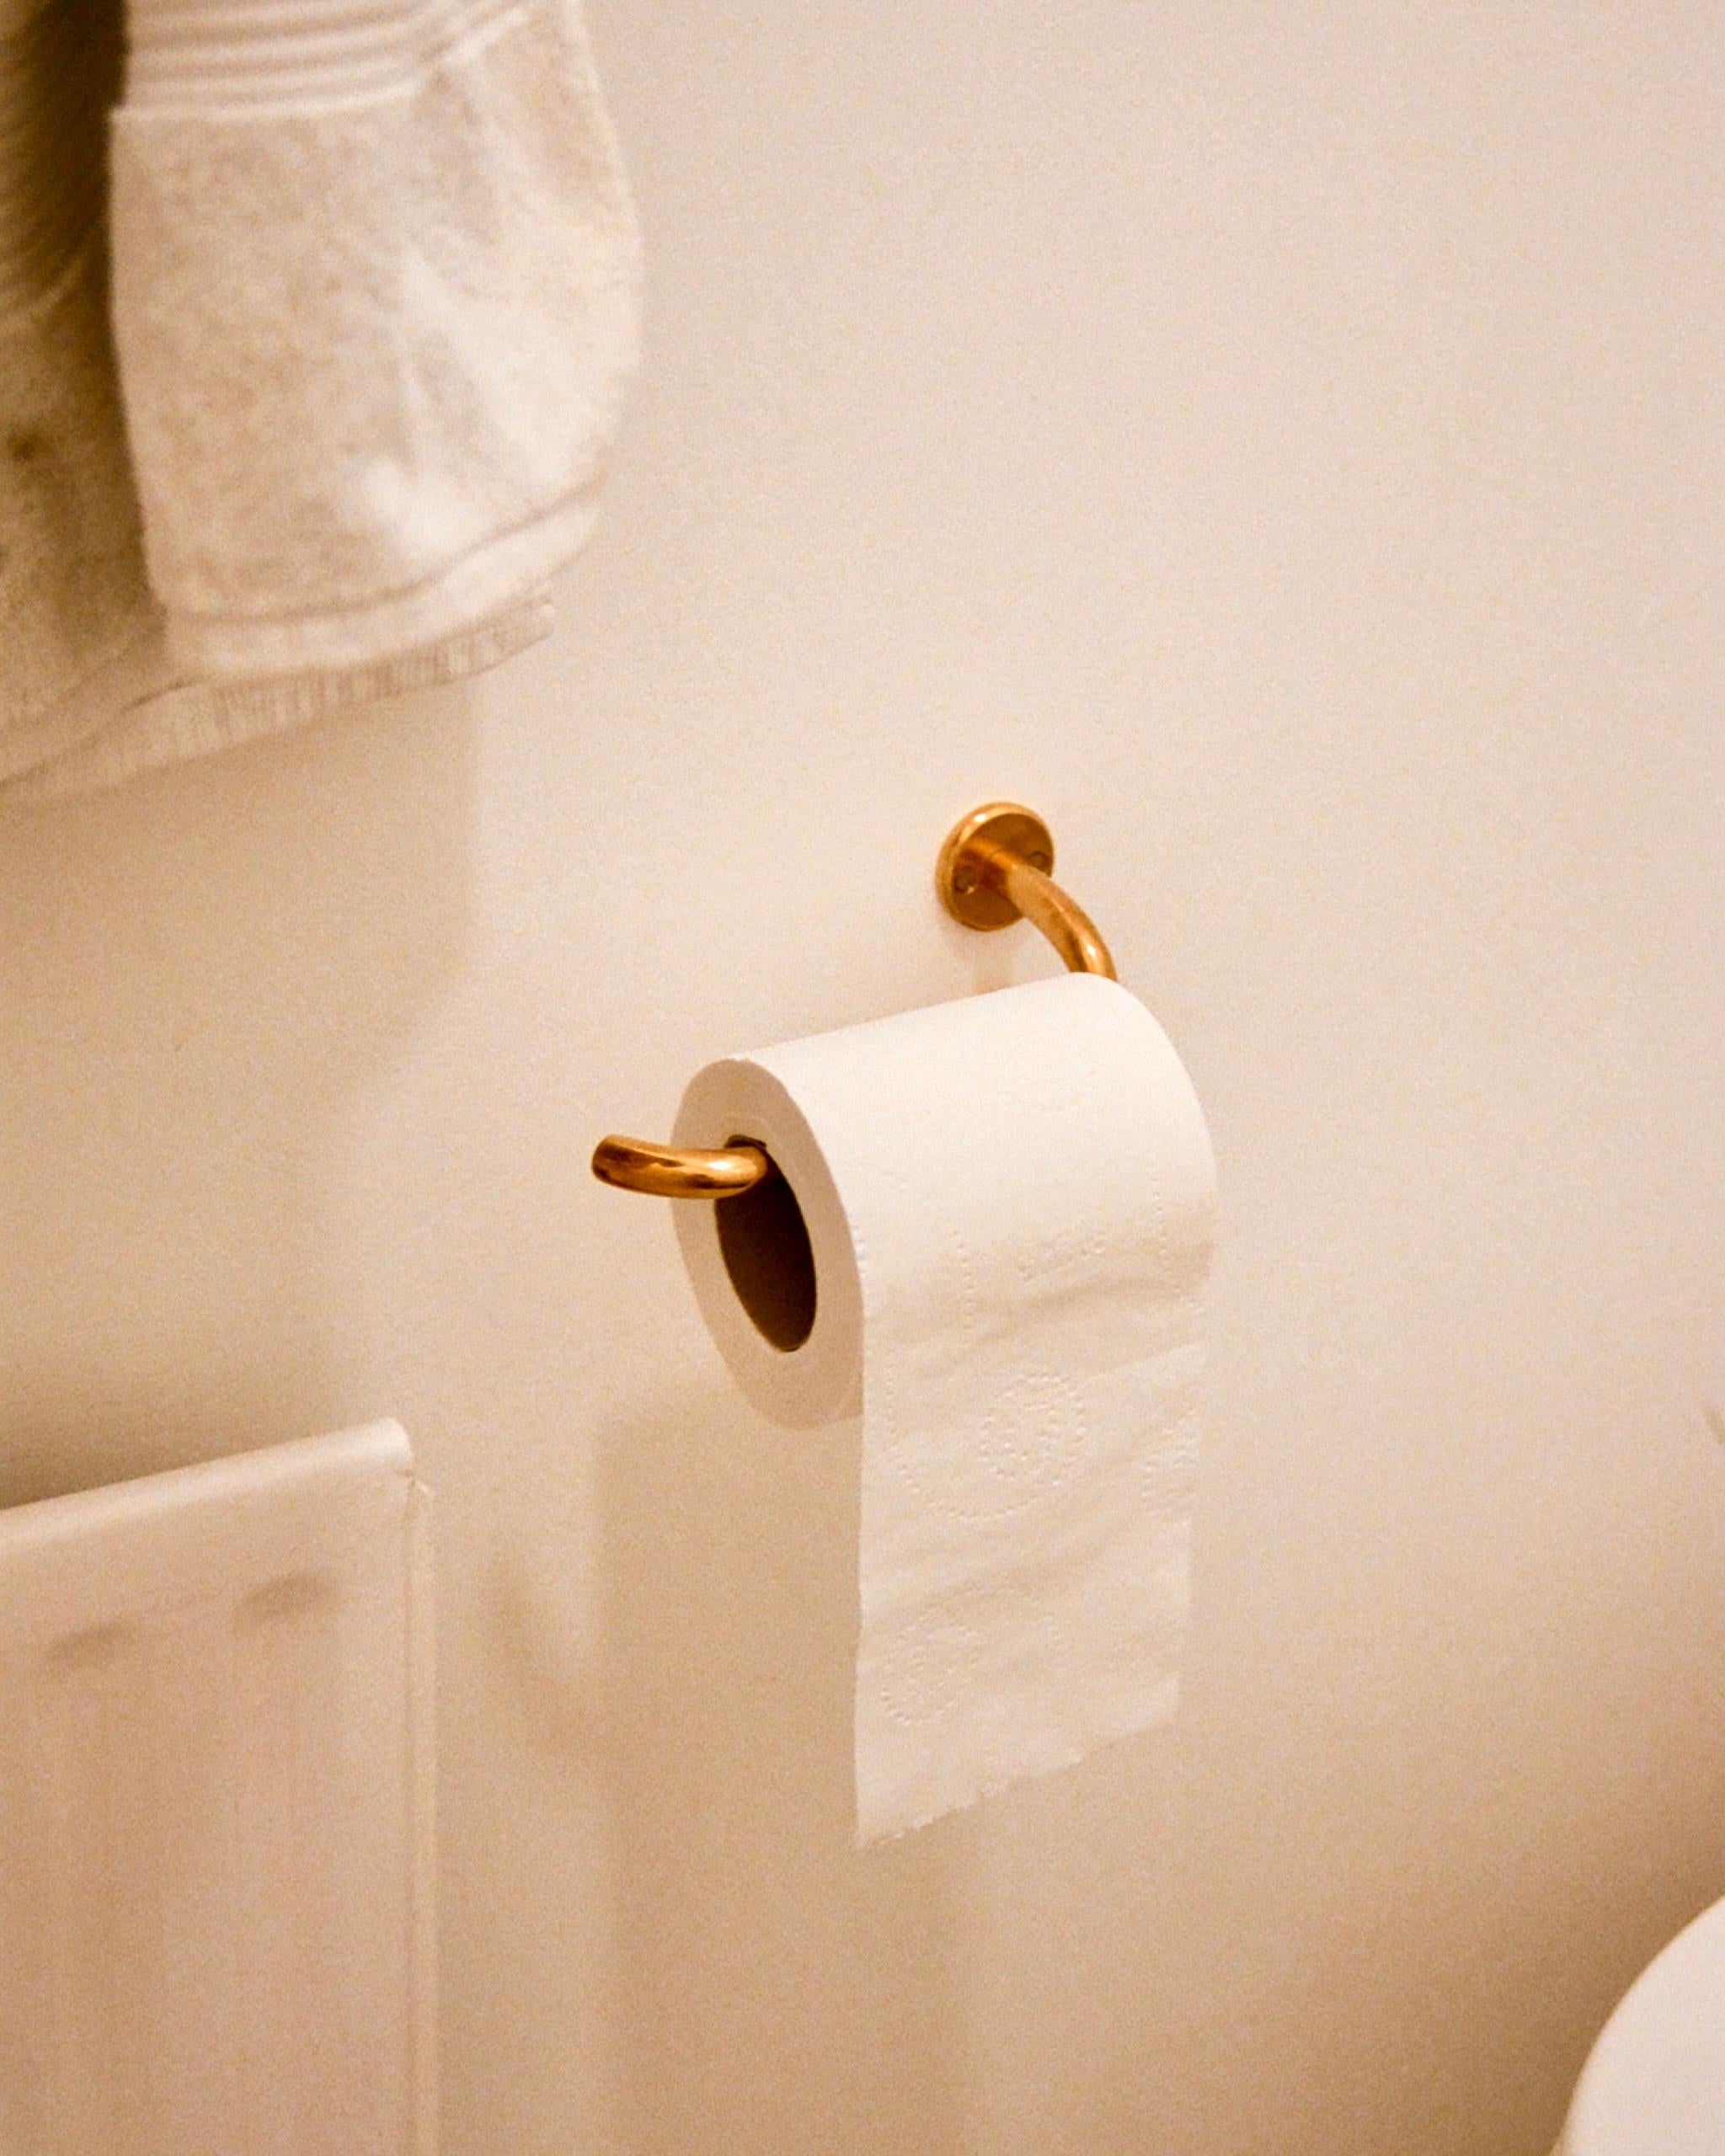 Cast FAUNA Toilet Roll Holder For Sale